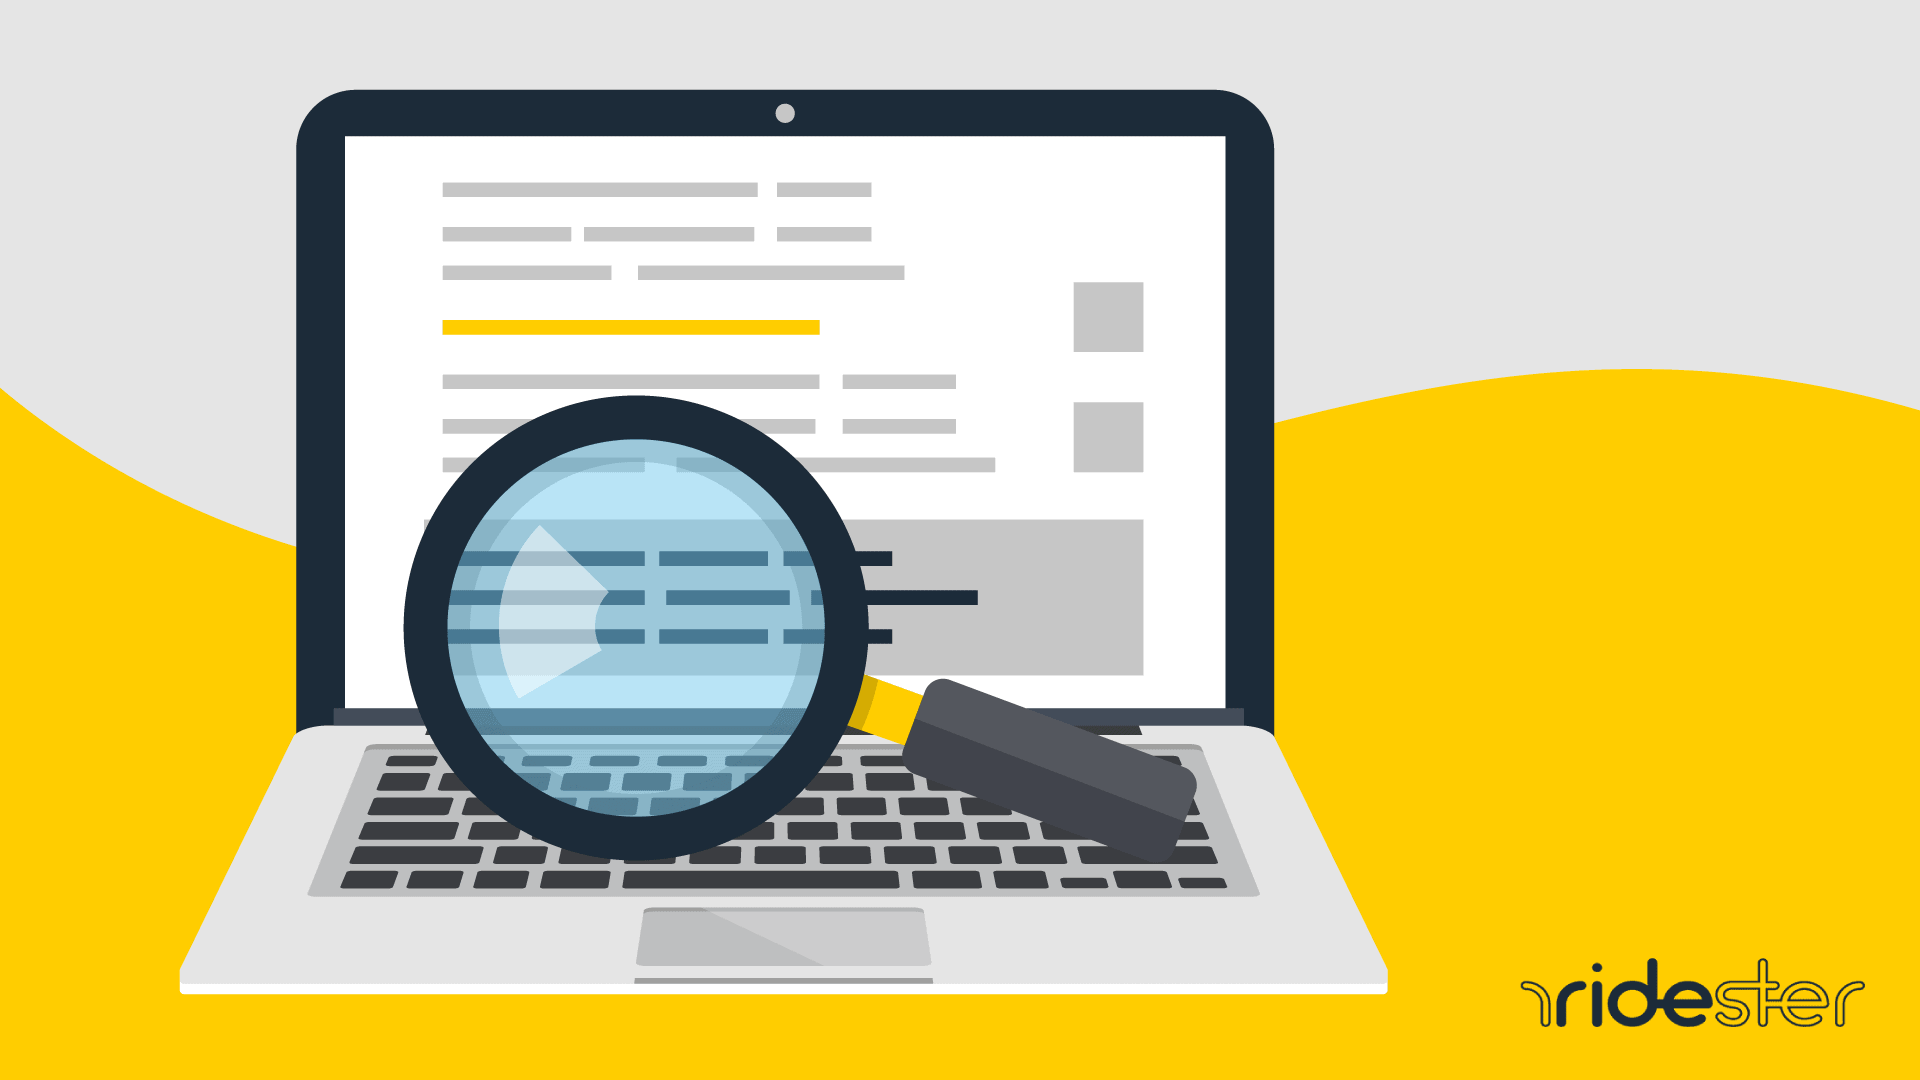 vector graphic of a magnifying glass sitting on laptop keyboard on Uber background check post